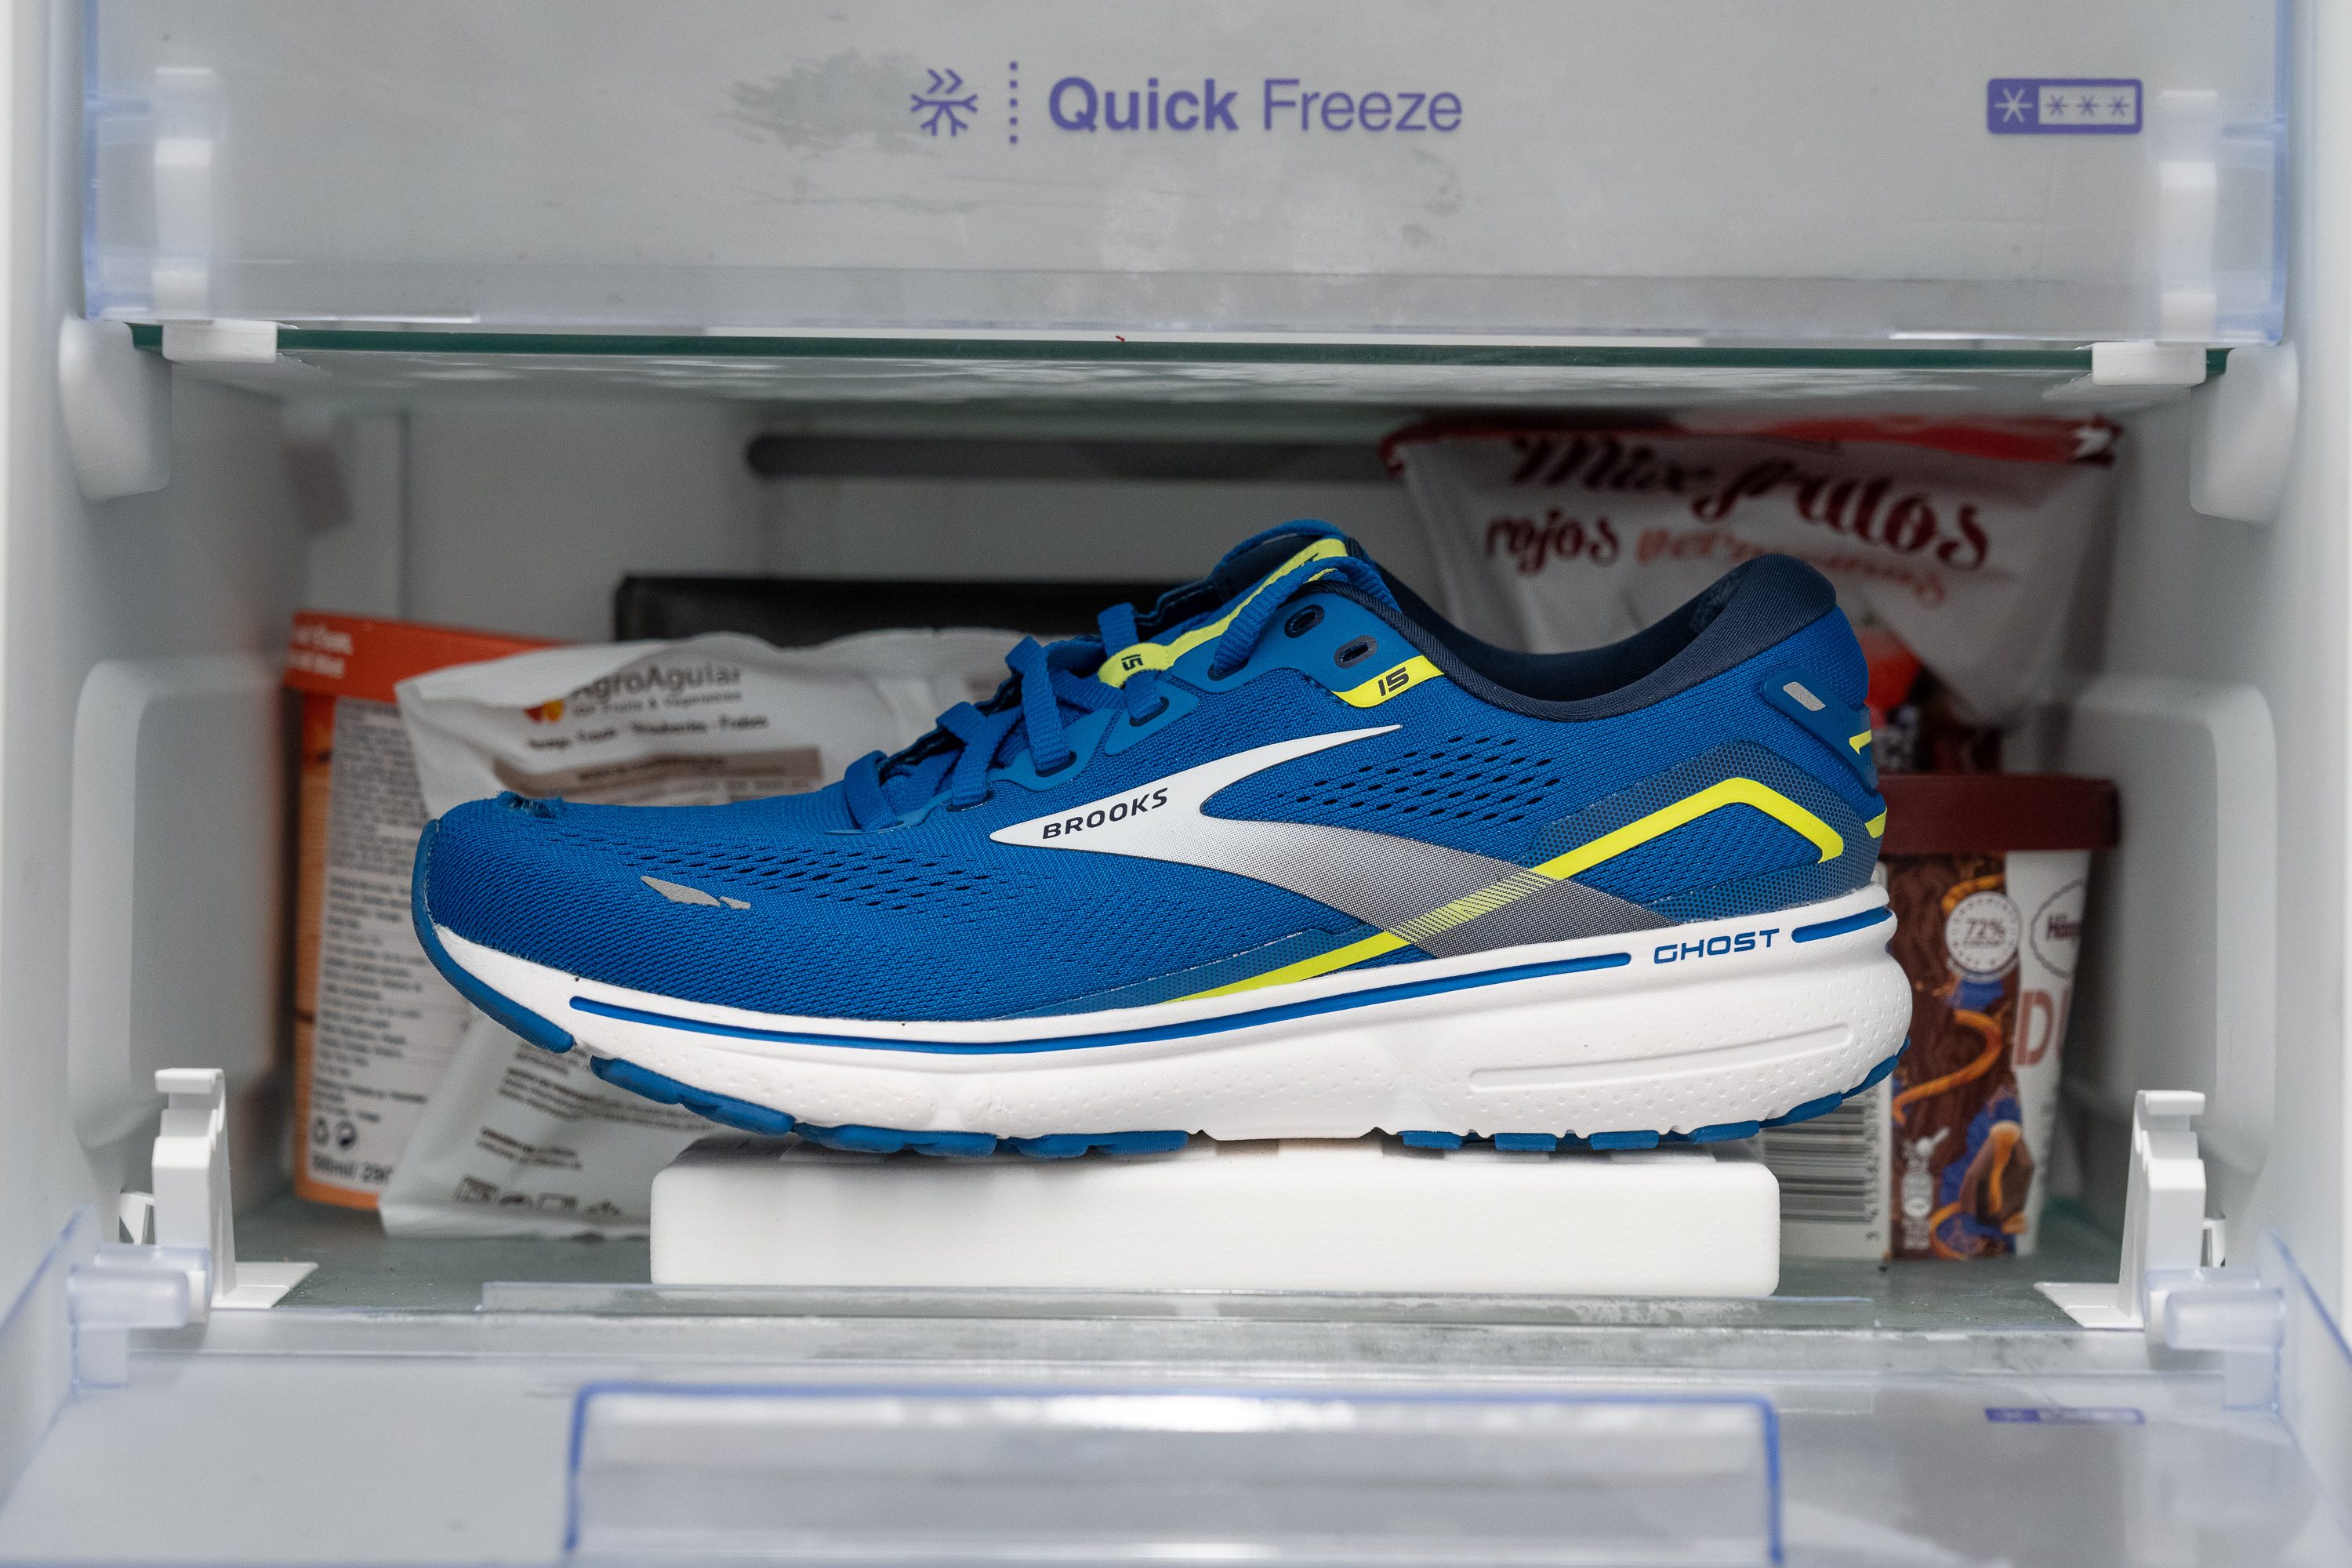 a Brooks stability shoe with the guide rails system Midsole softness in cold